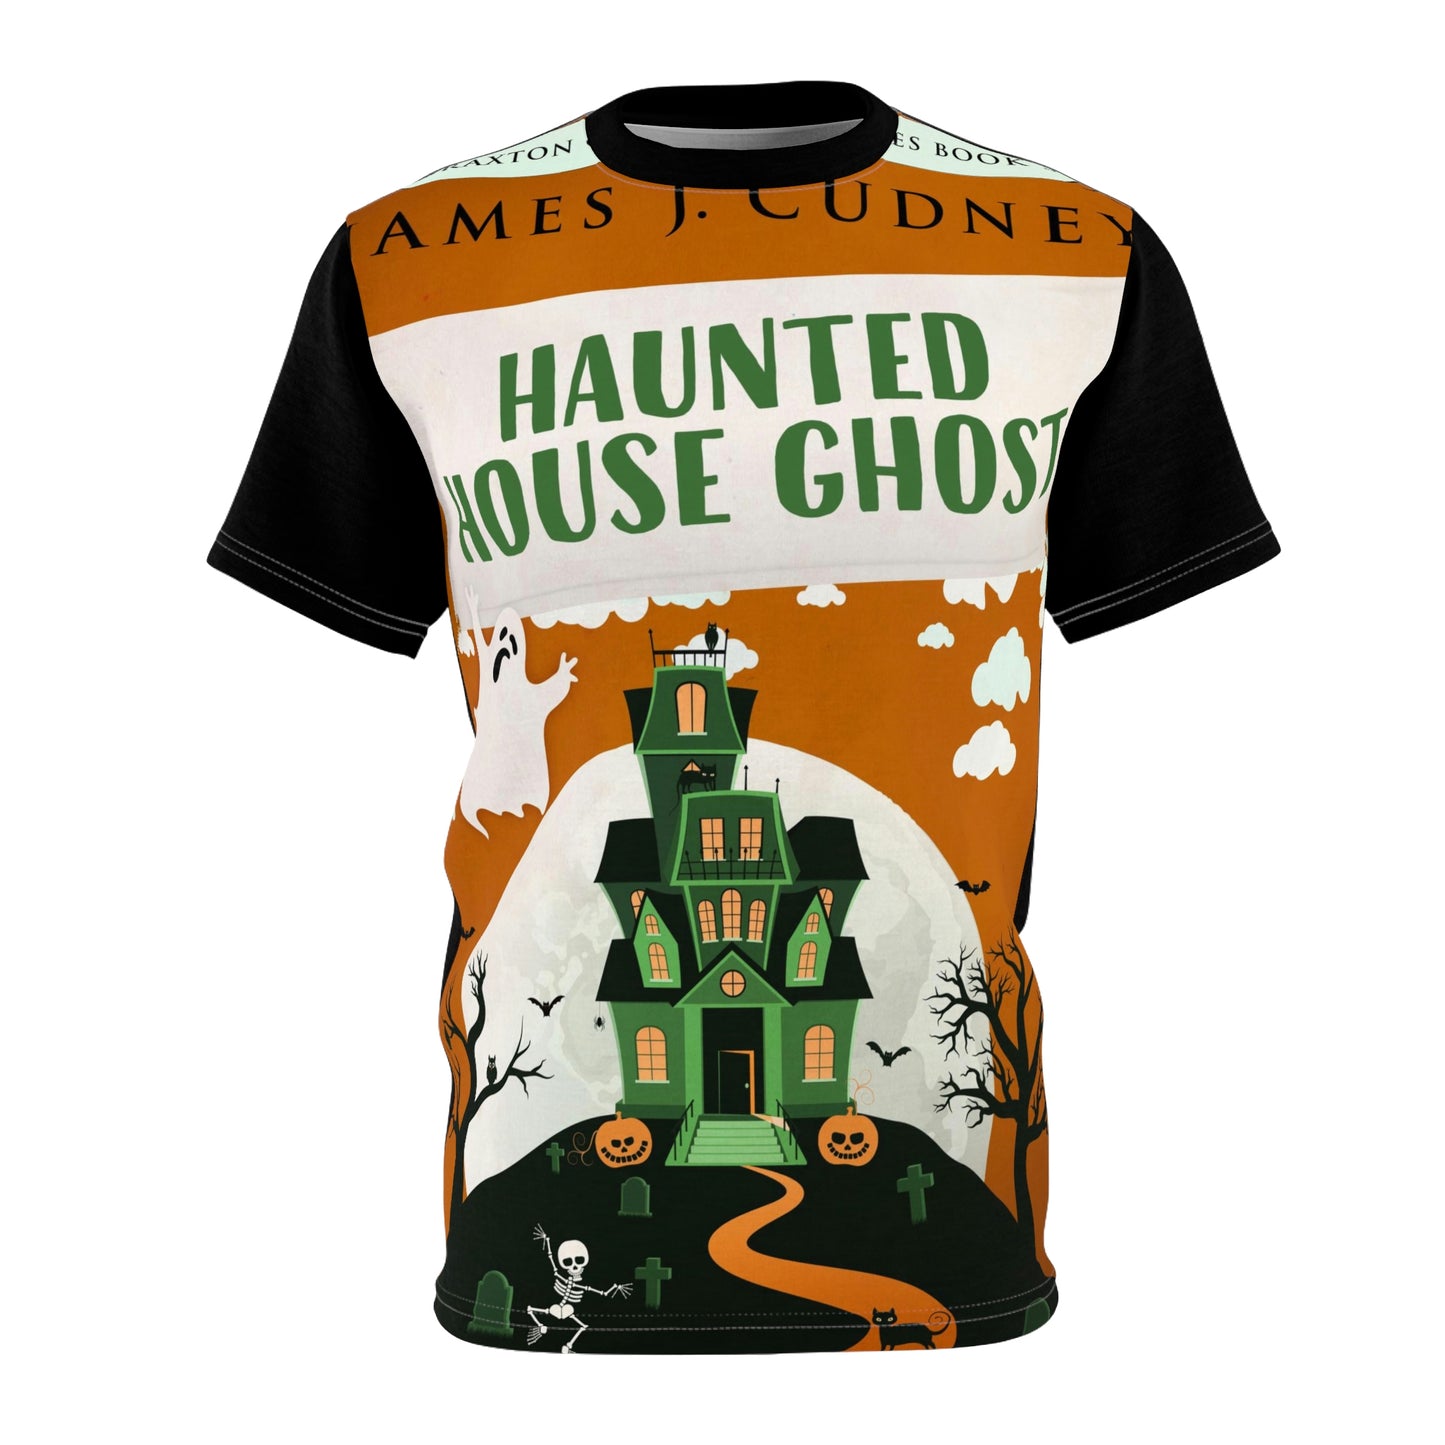 Haunted House Ghost - Unisex All-Over Print Cut & Sew T-Shirt